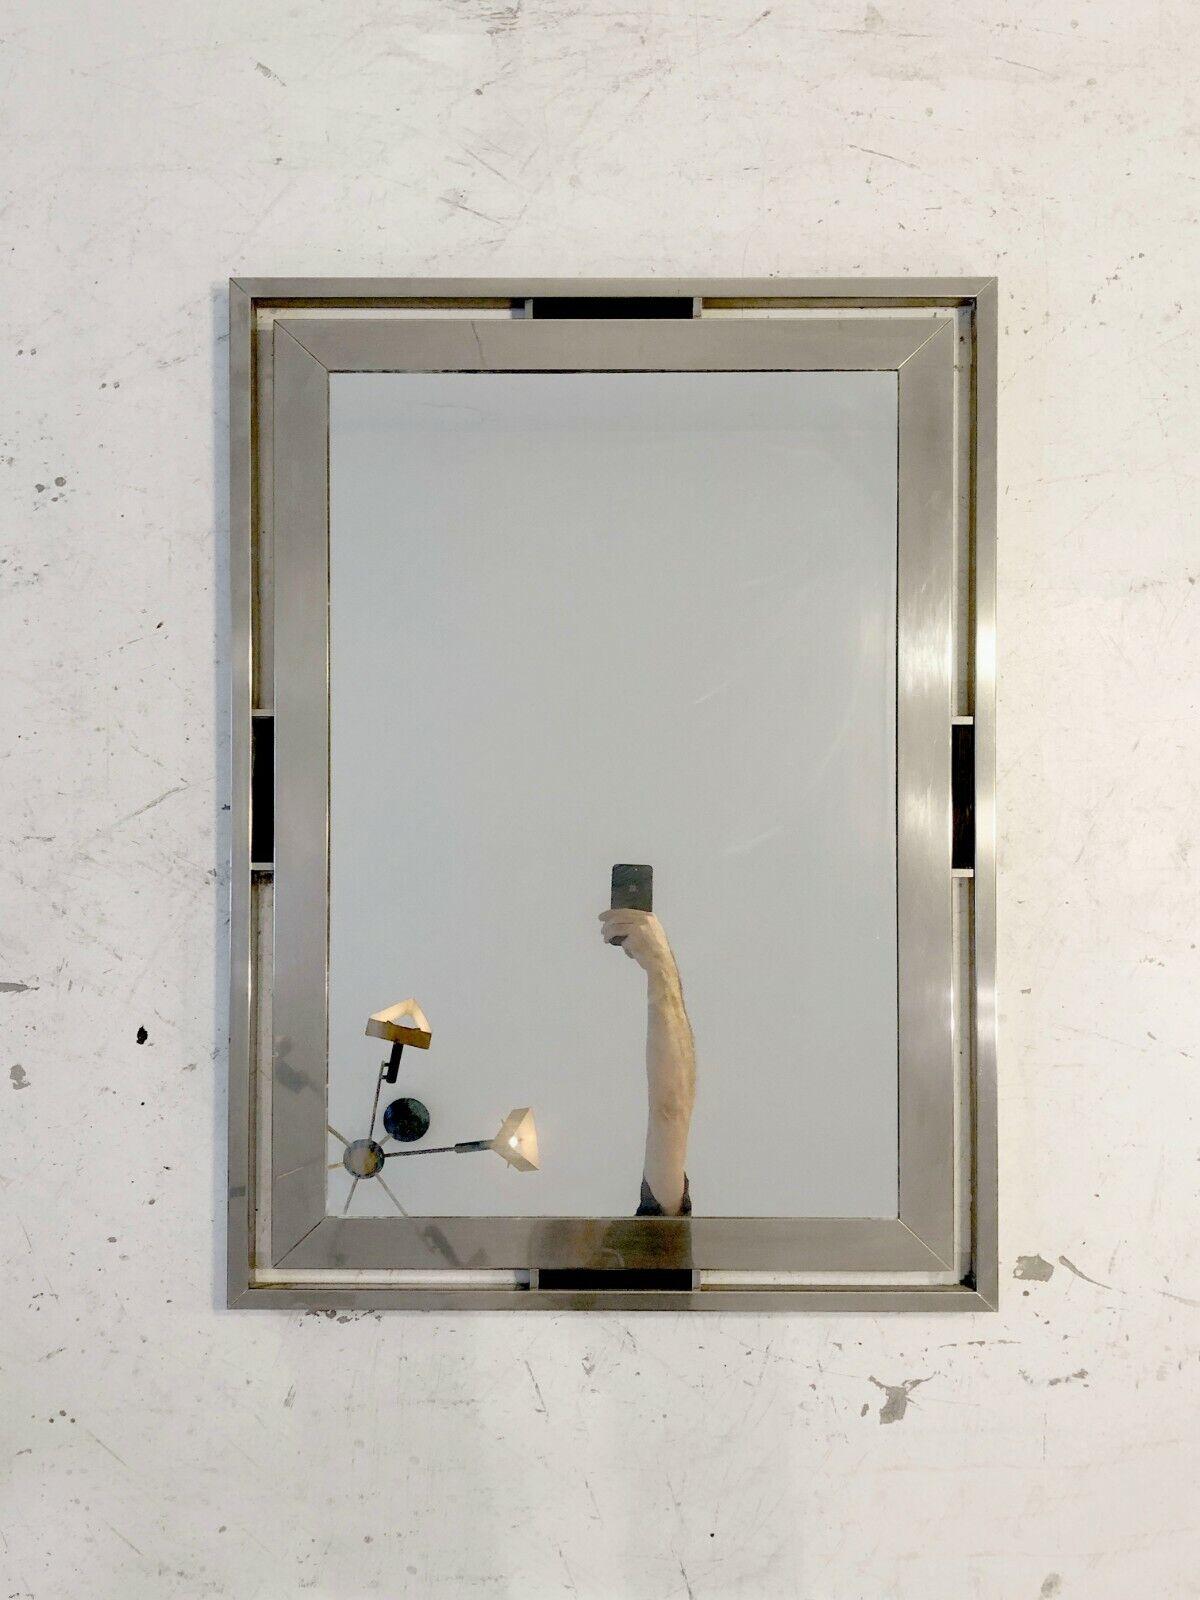 An important rectangular wall mirror, Art-Deco, Modernist, Neo-Classical, with a double frame in brushed steel veneered on a wooden base, linked by 4 elegant and graphic black elements, by Guy Lefevre, Jansen edition, France 1970. 